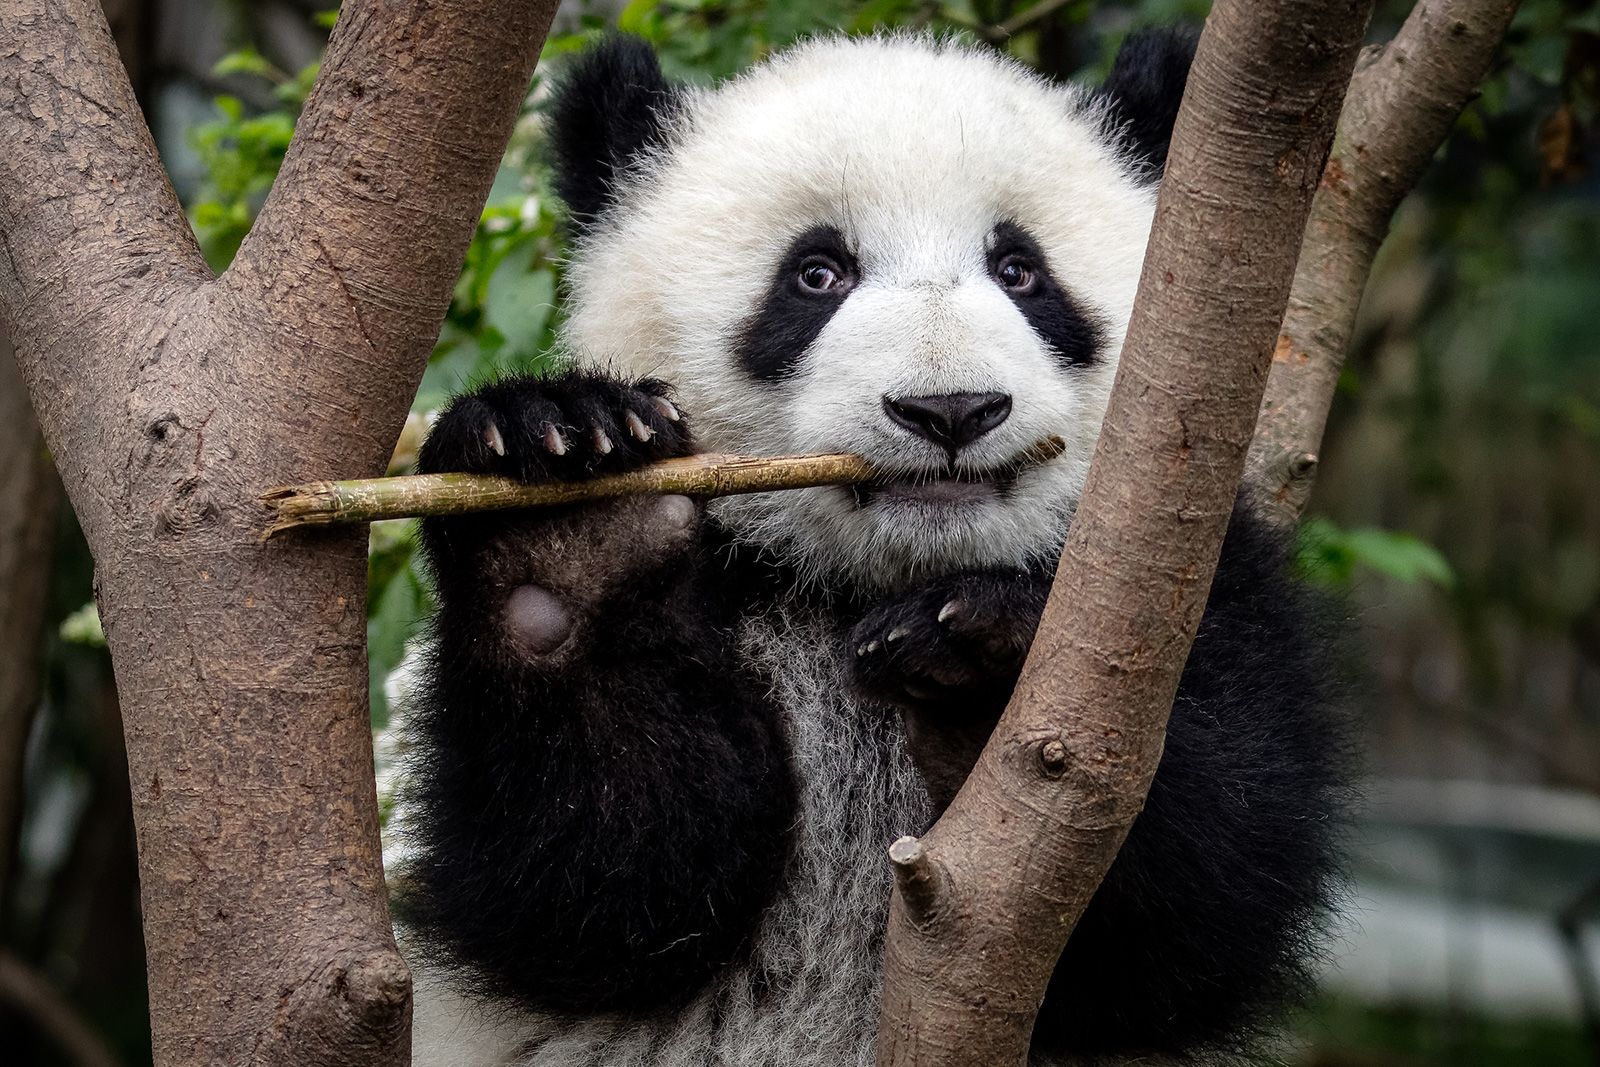 Pandas evolved their most perplexing feature at least 6 million years ago